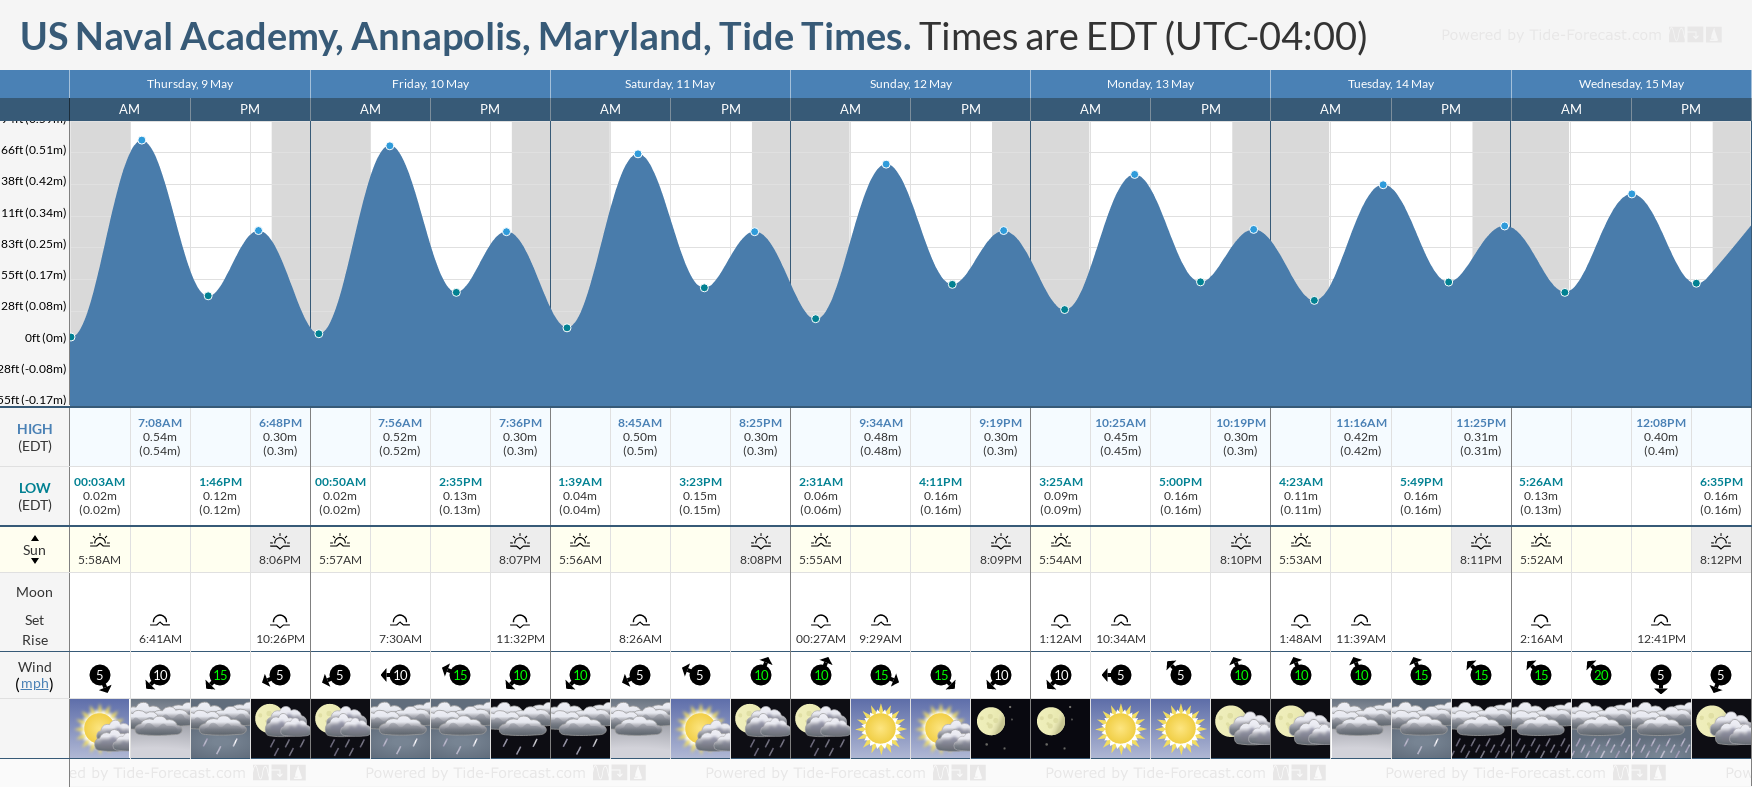 US Naval Academy, Annapolis, Maryland Tide Chart including high and low tide tide times for the next 7 days